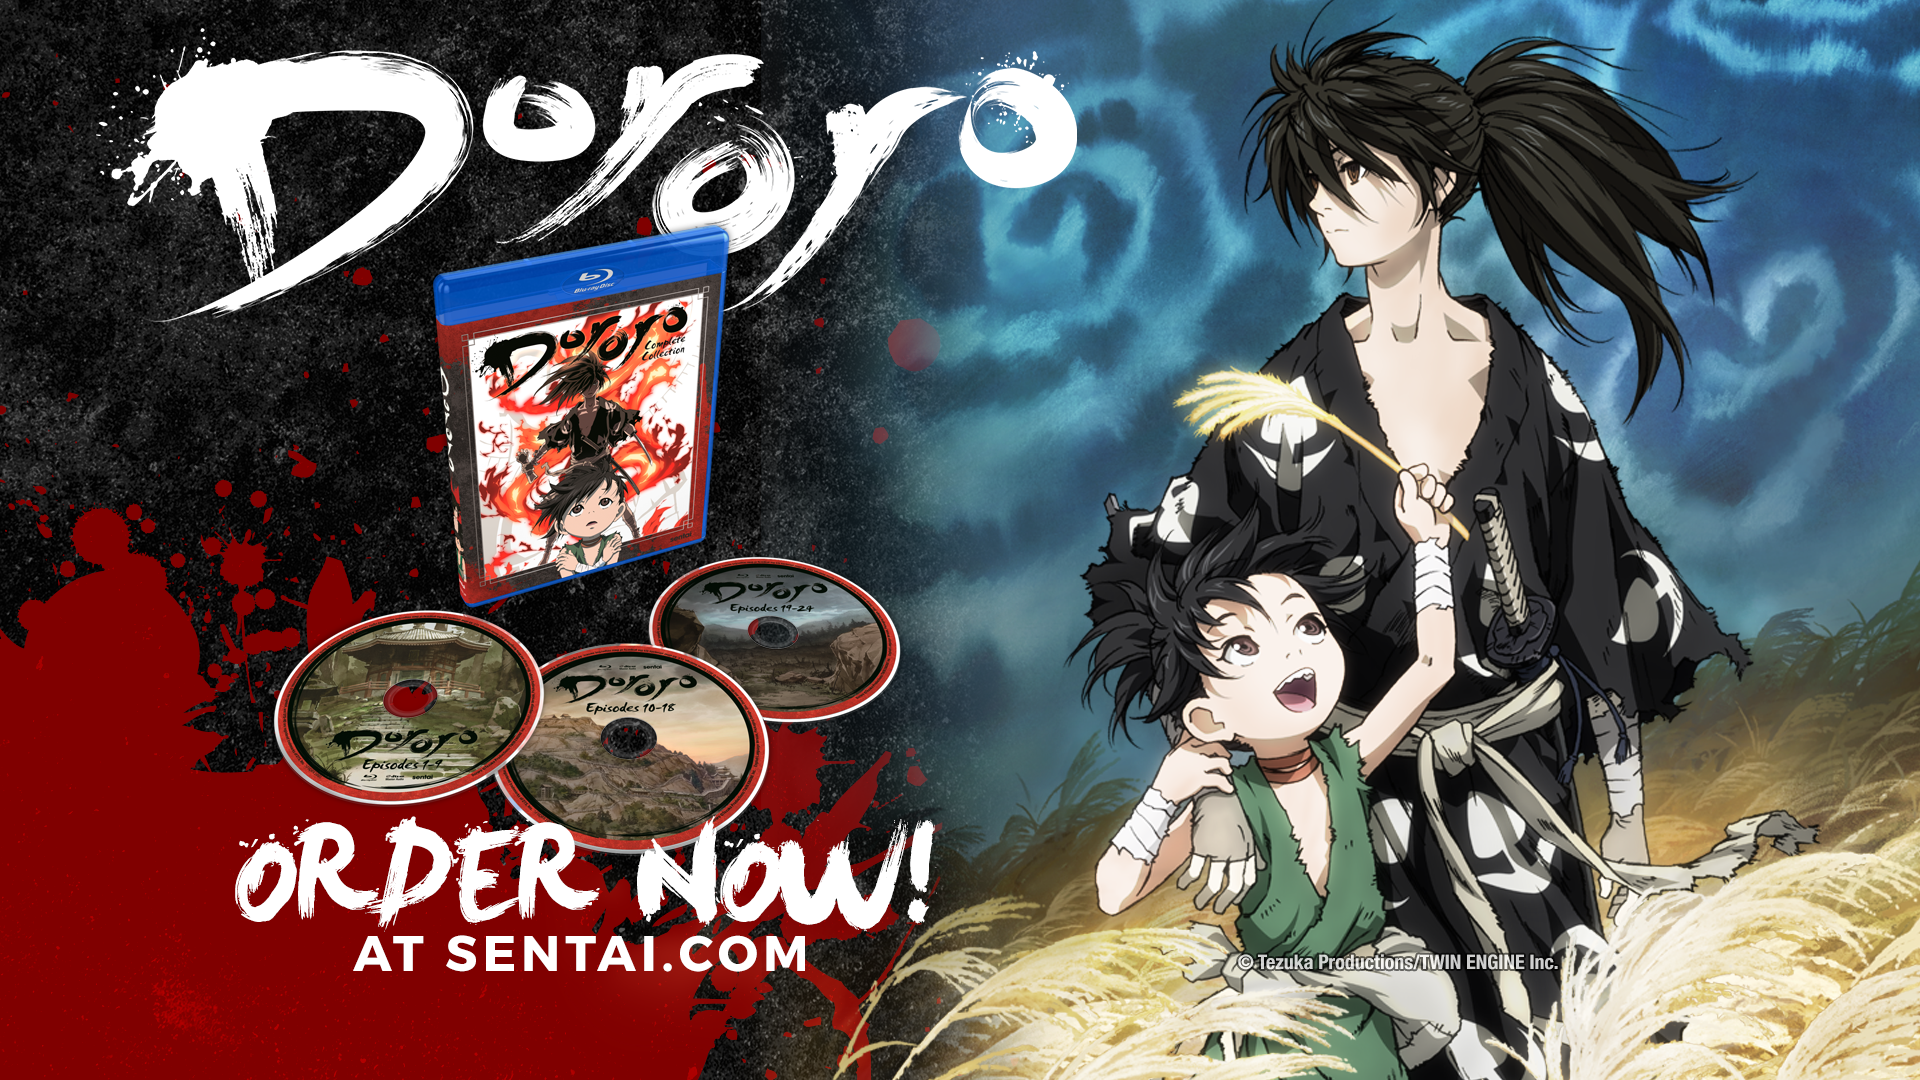 The logo, Blu-ray packaging and the three discs for Dororo. The text says, "Dororo" and "Order now at sentai.com". The characters in the image are Hyakkimaru and Dororo.